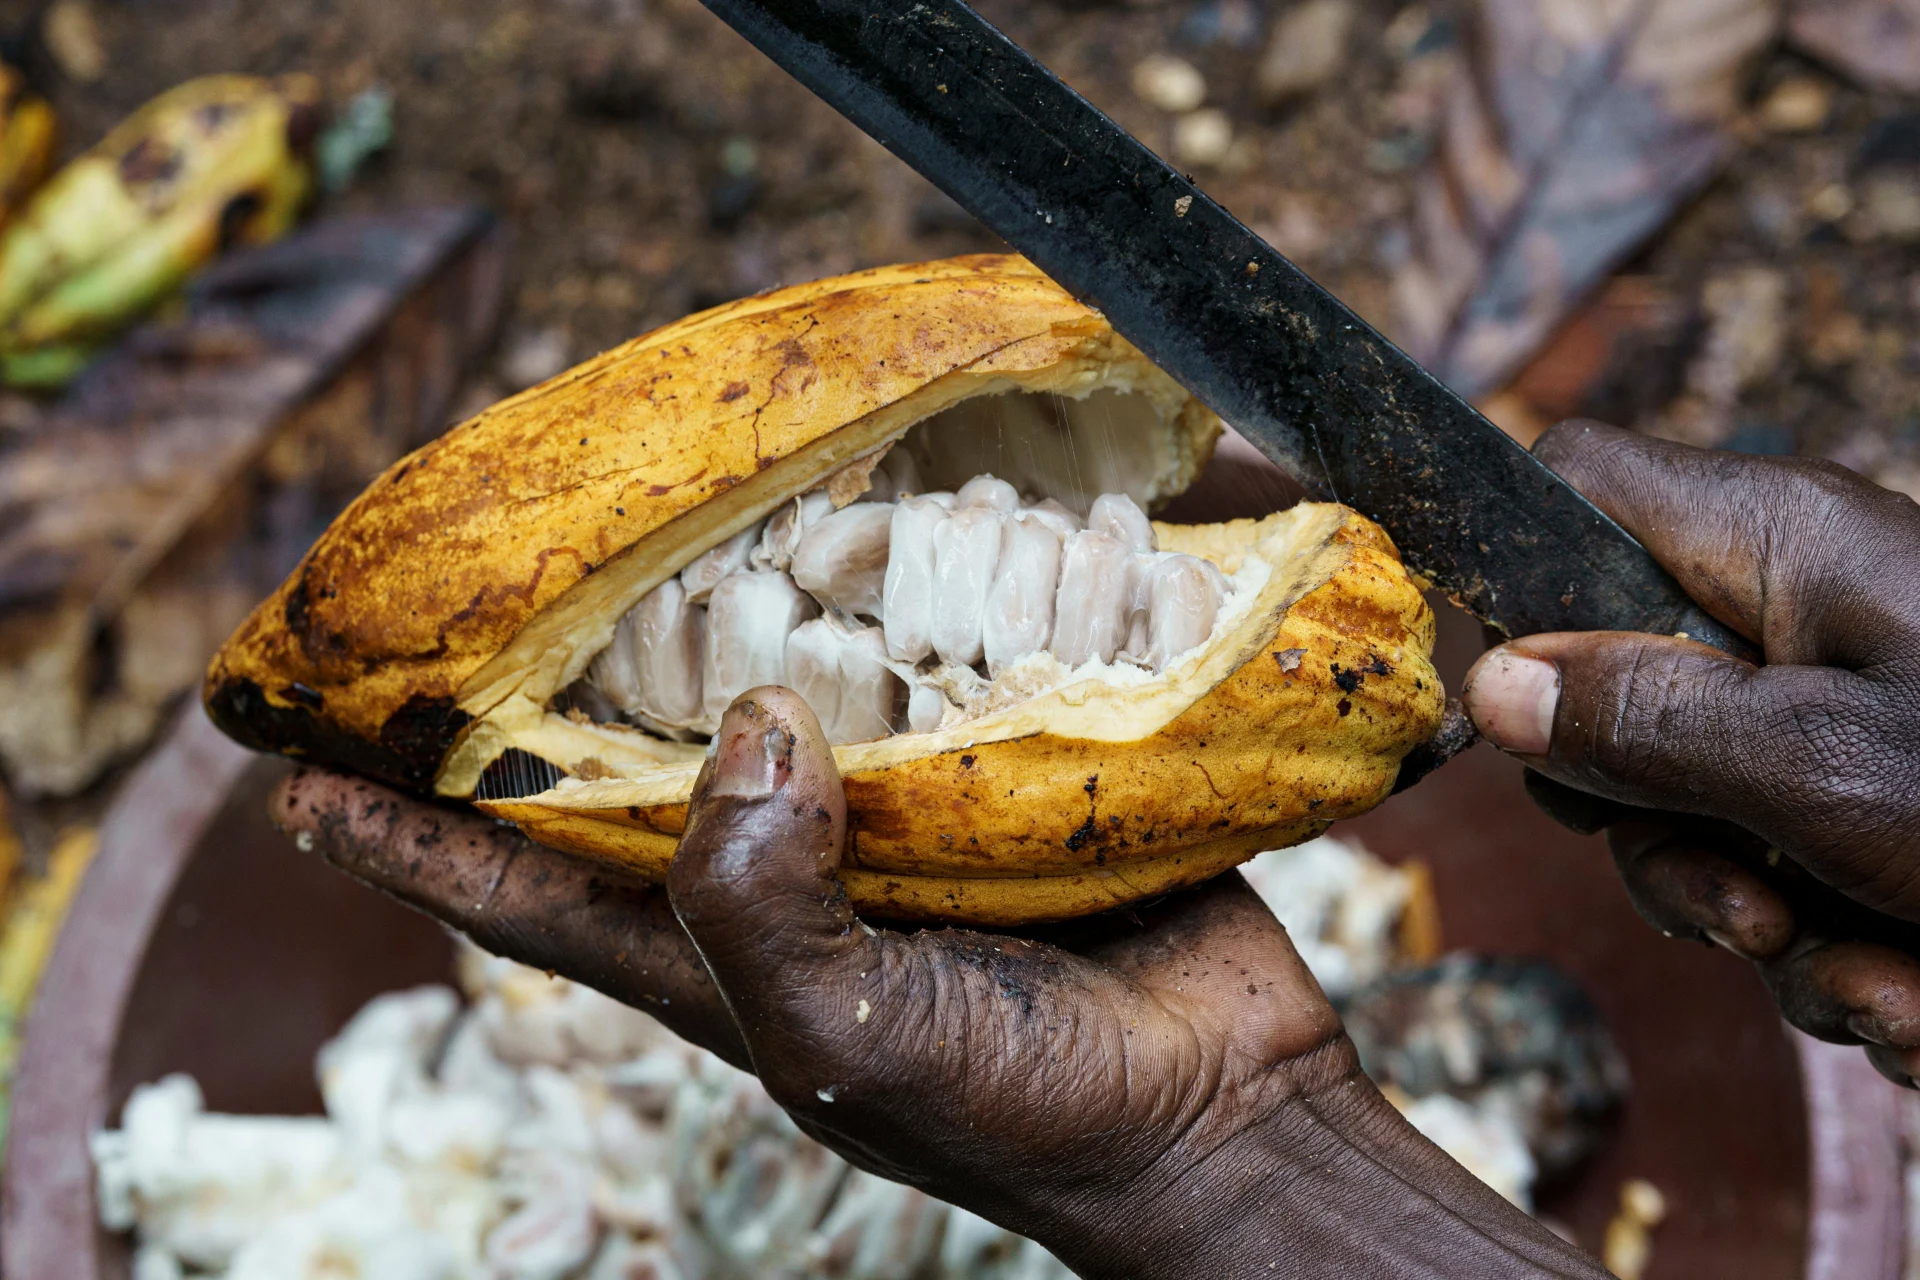 A hand holding an open cocoa fruit.